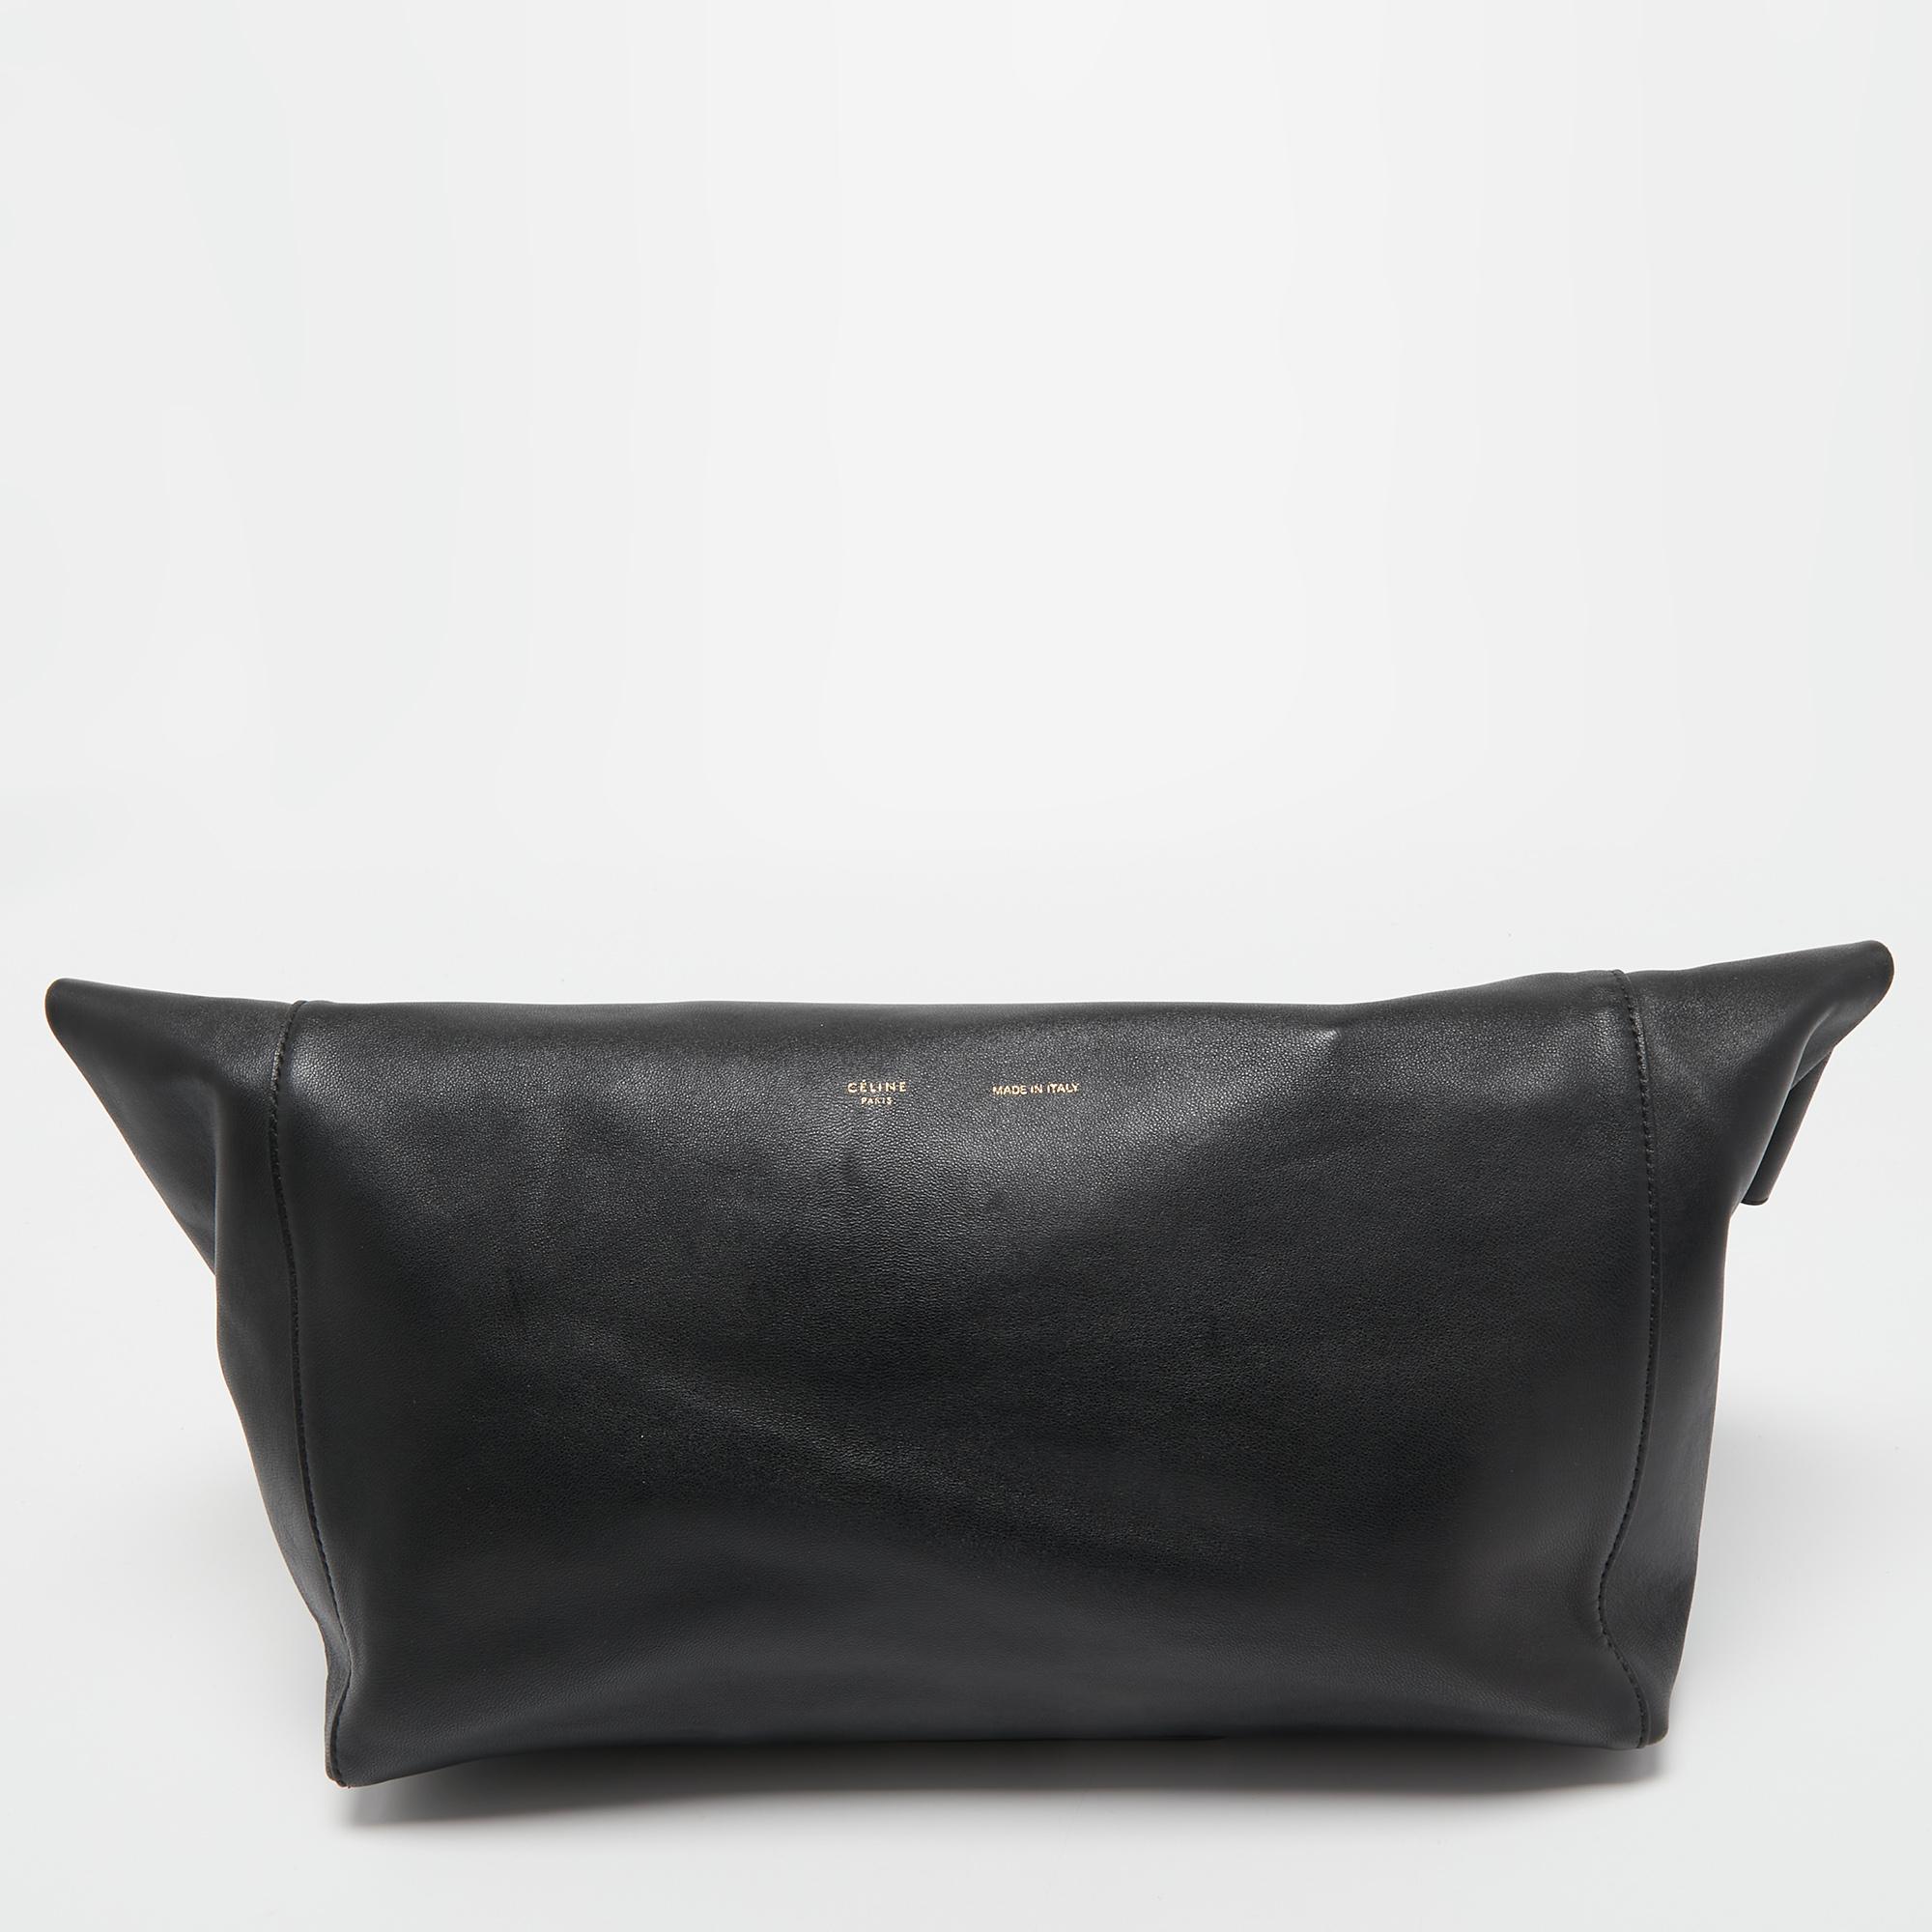 Made of smooth leather, this clutch from Celine has a functional silhouette and an understated charm for versatile styling. It is designed with a fold-over top, a spacious interior, and a metal bar.

